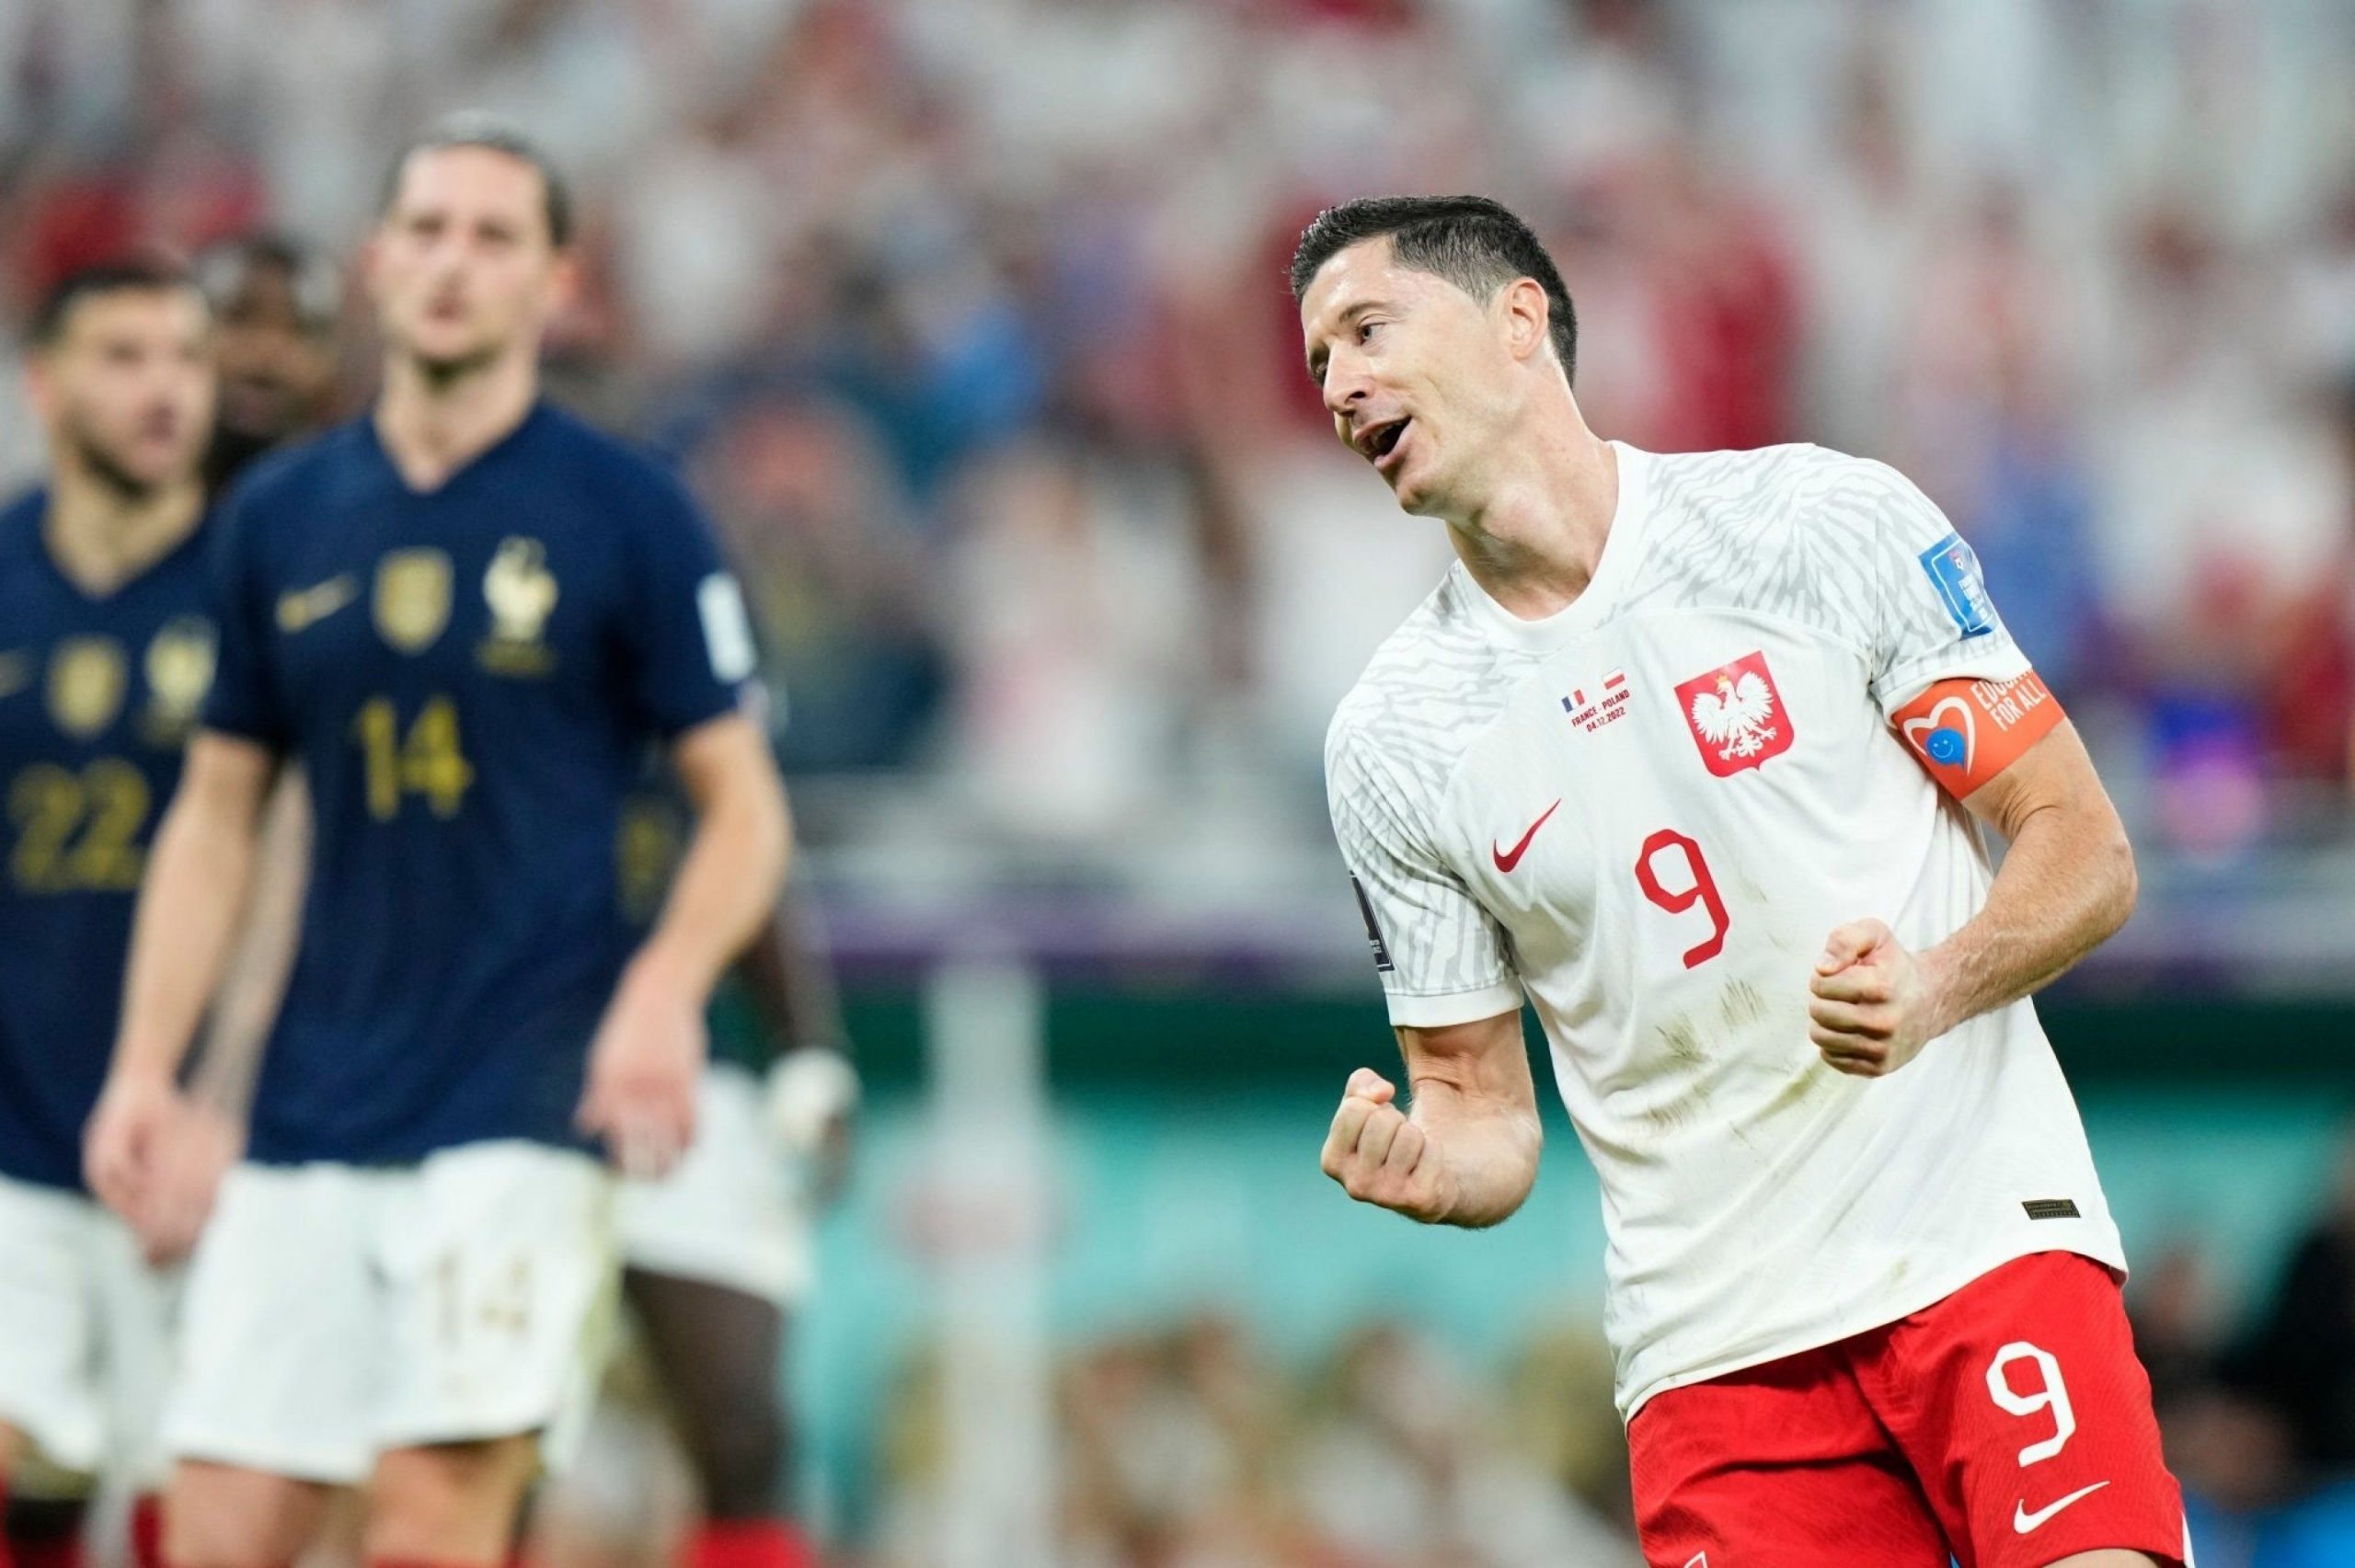 Poland’s Robert Lewandowski trolled for stuttering penalty run-up vs France in FIFA World Cup 2022 round of 16